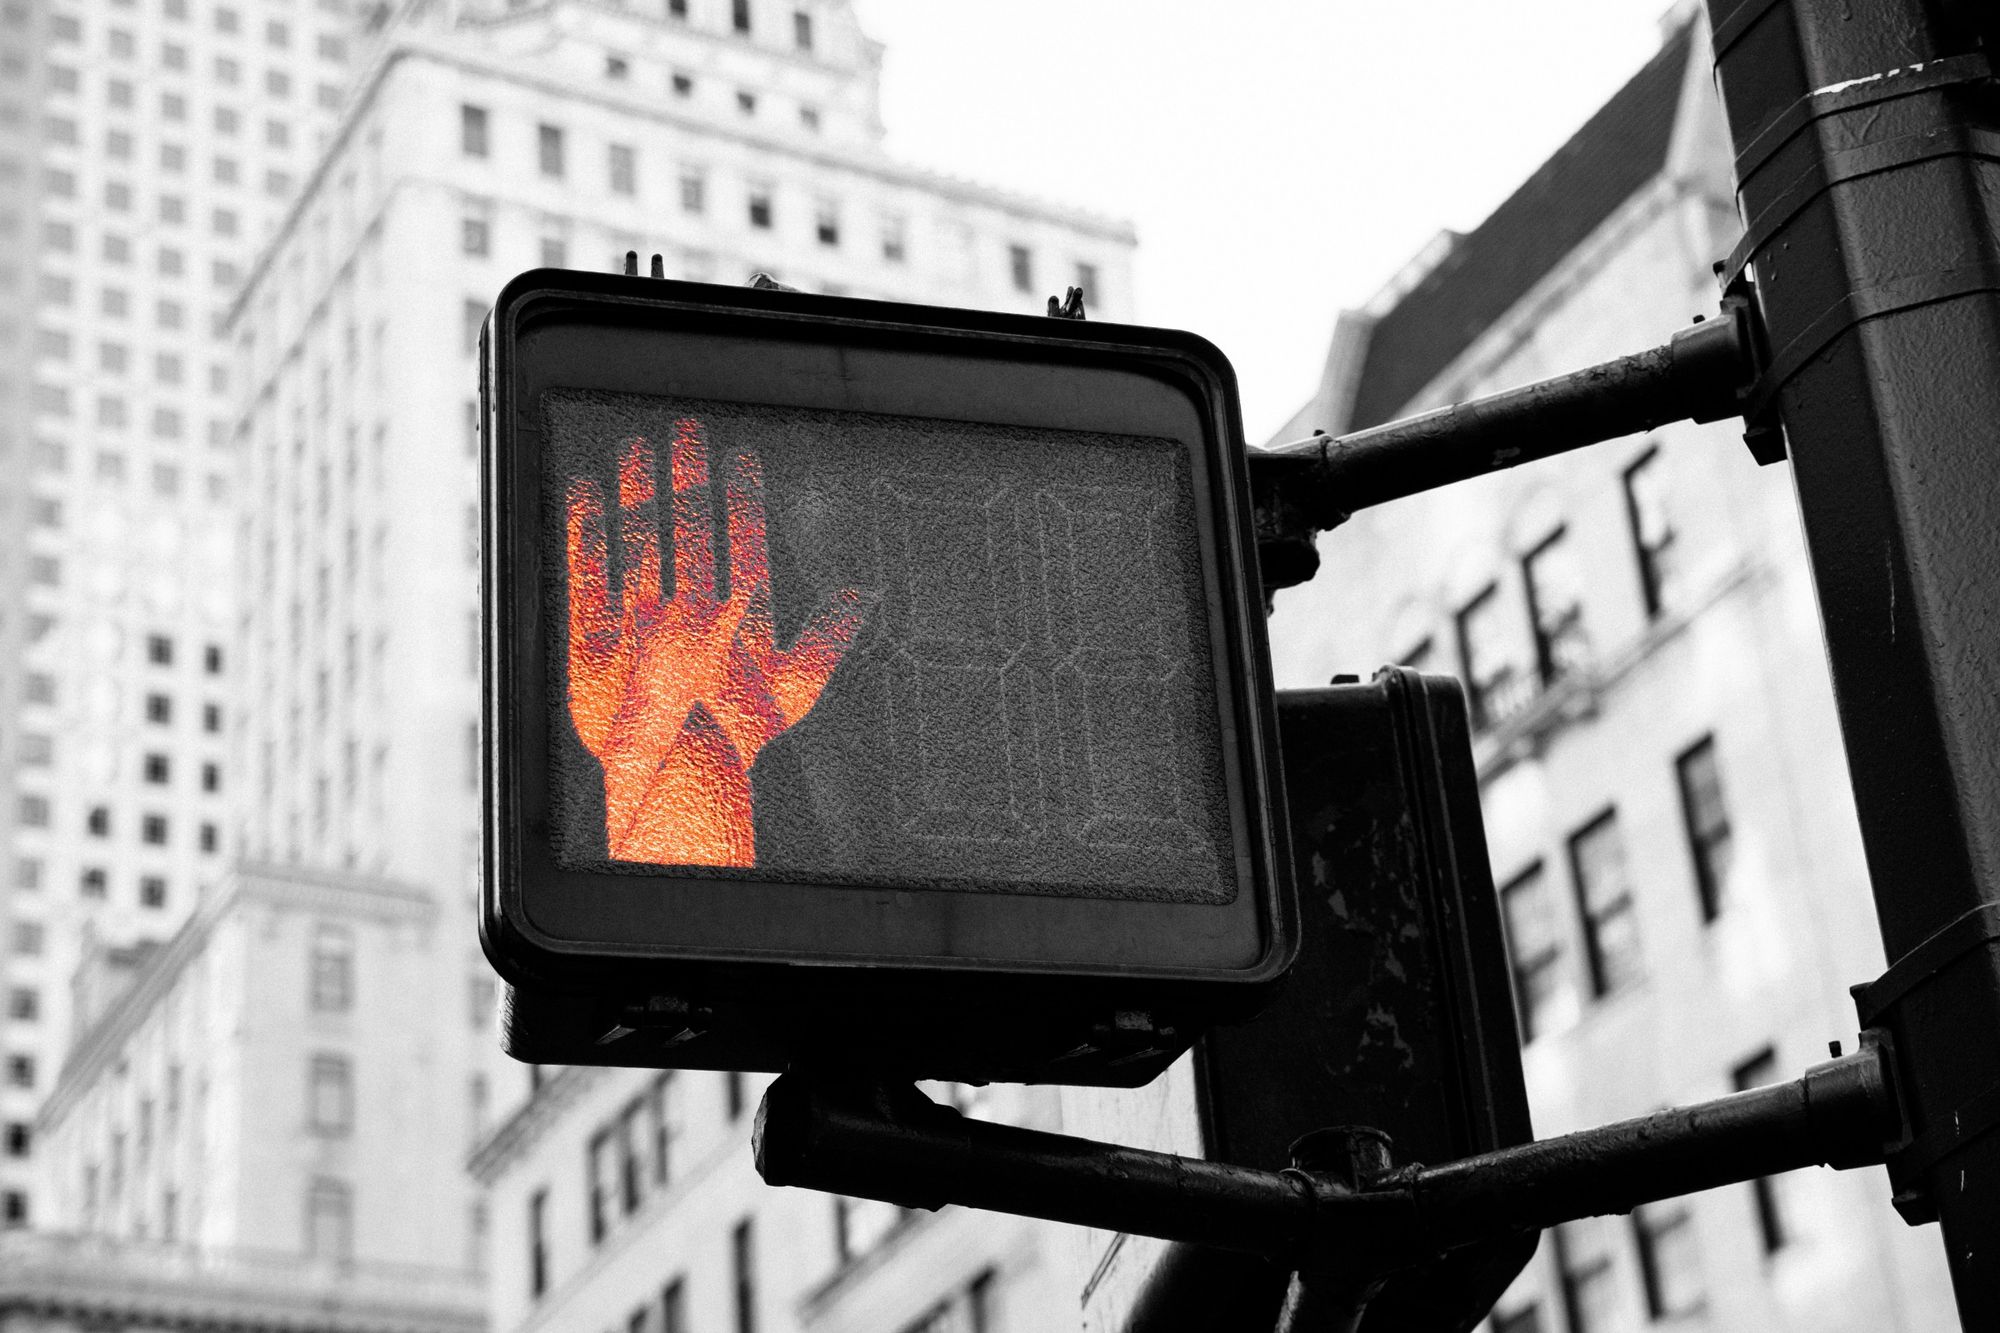 United states black and white photo of a pedestrian signal white the stop hand signal colored orange